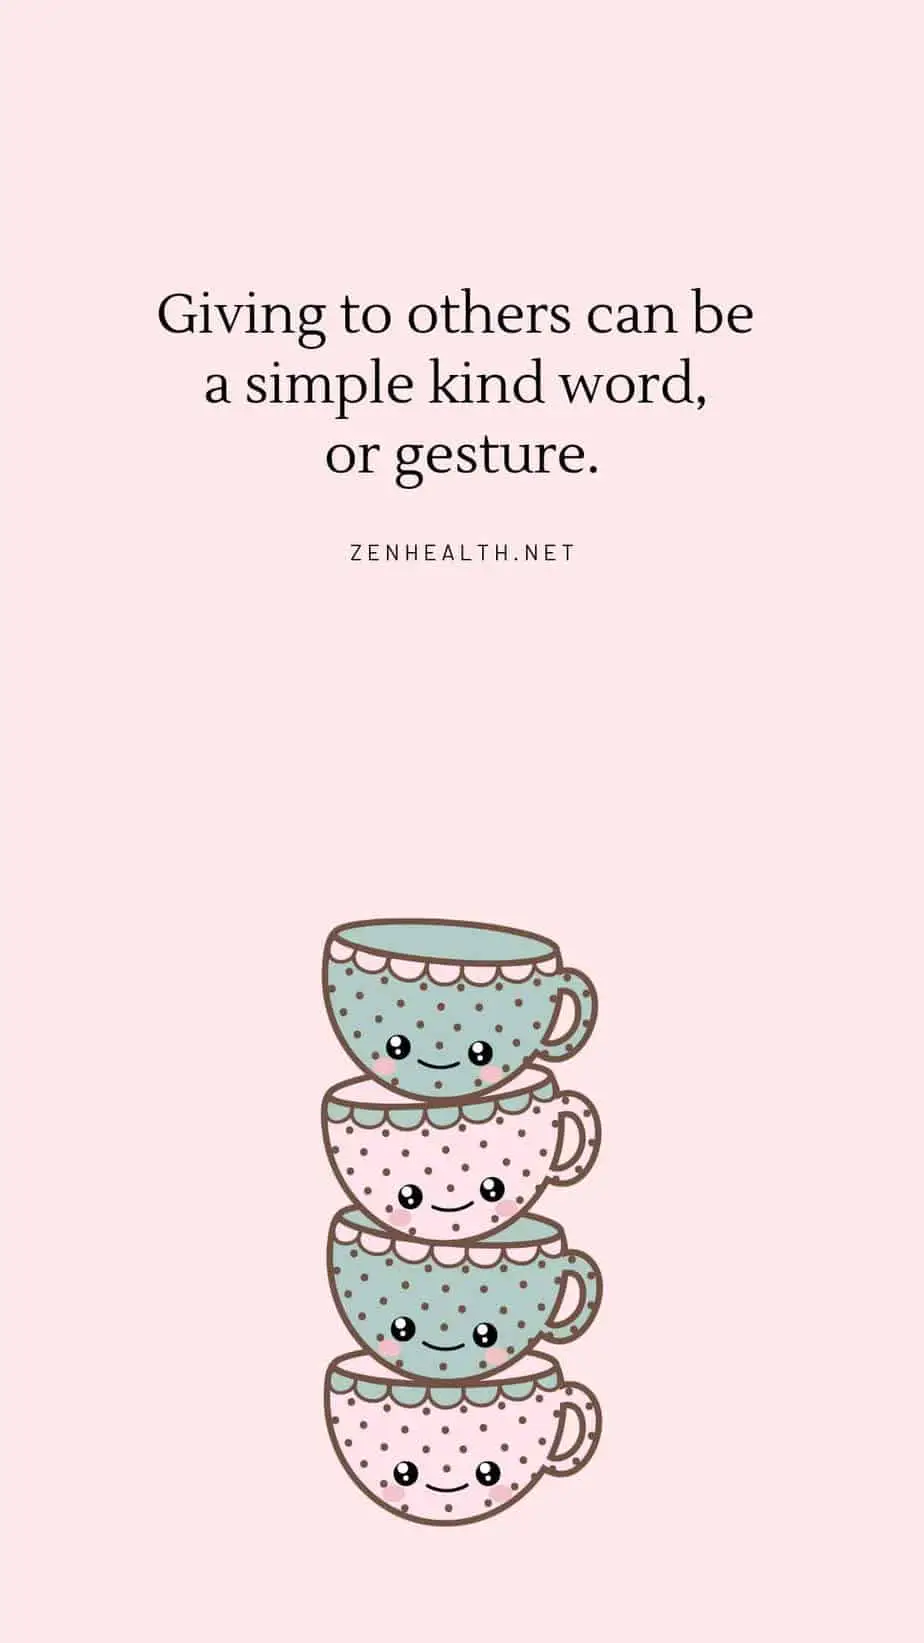 Happiness quotes: Giving to others can be a simple kind word, or gesture.